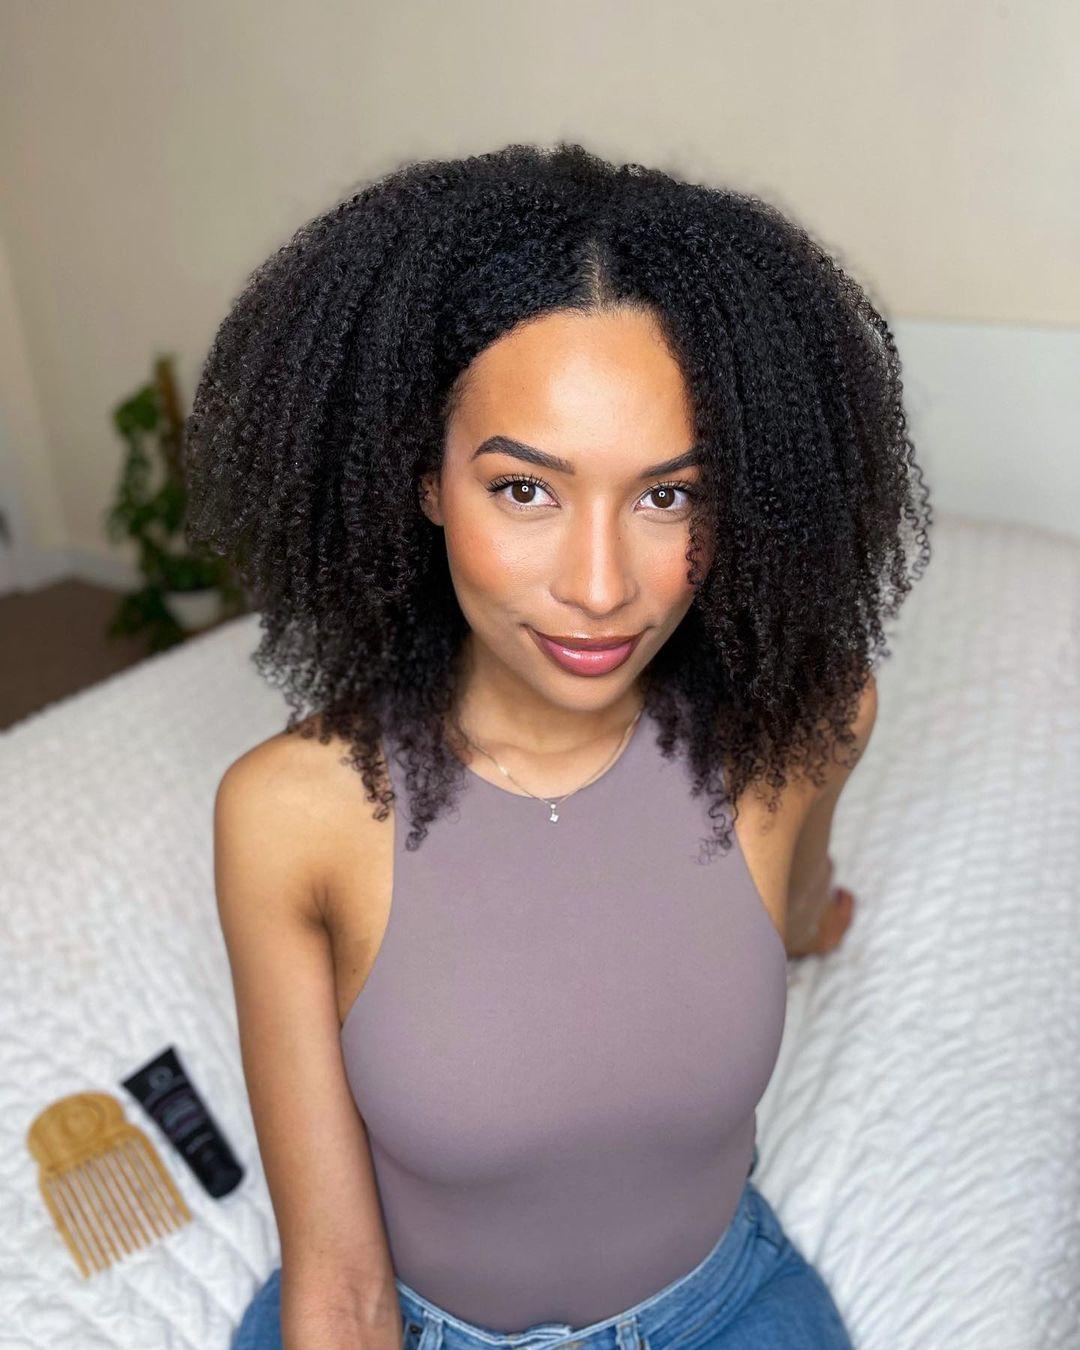 class="content__text"
 ✨SAVE to come back to later!

Would you believe me if I told you this was a ONE product wash day?

✨AD- I put the @controlledchaoshair Curl Cream to the test and loved the results! It's a four in one product so my wash day was so quick and easy and I still had volume, definition and minimal frizz . I also love that it's a heat protectant!

Benefits:
🤍Quicker wash day 
🤍Less products (perfect for holidays or busy schedules)
🤍Defines, detangles, strengthens and adds shine
🤍Heat protectant 
🤍Minimal frizz
🤍For all curly hair types 

🖤Have you tried @controlledchaoshair before ? Use code CCHANNAHM10 if you want to give them a try!

✨Follow for more natural hair posts 
✨Save to come back to later ! 

 #naturalhaircareblogger #texturedhairstyle #naturalhairgirls #curlygirlcommunity #curlyhairinspiration #curlygirljourney #naturalhairbeauty #naturalhairlovers #curlyhairtutorial #curlynaturals #naturalcurly #curlyhairgirl #curlyhairgirls #perfectlycurly #blessedwithcurls #curlybeauty #healthycurls #naturalhaircareproducts #healthyhairtips #curlyhairproducts #curlyhairstyle #embraceyourcurls #curlyhaircare #hairgrowthjourney #healthynaturalhair #naturalcurlyhair #naturalhairblogger #curlybeauties #healthyhaircare #curlynaturalhair 
 